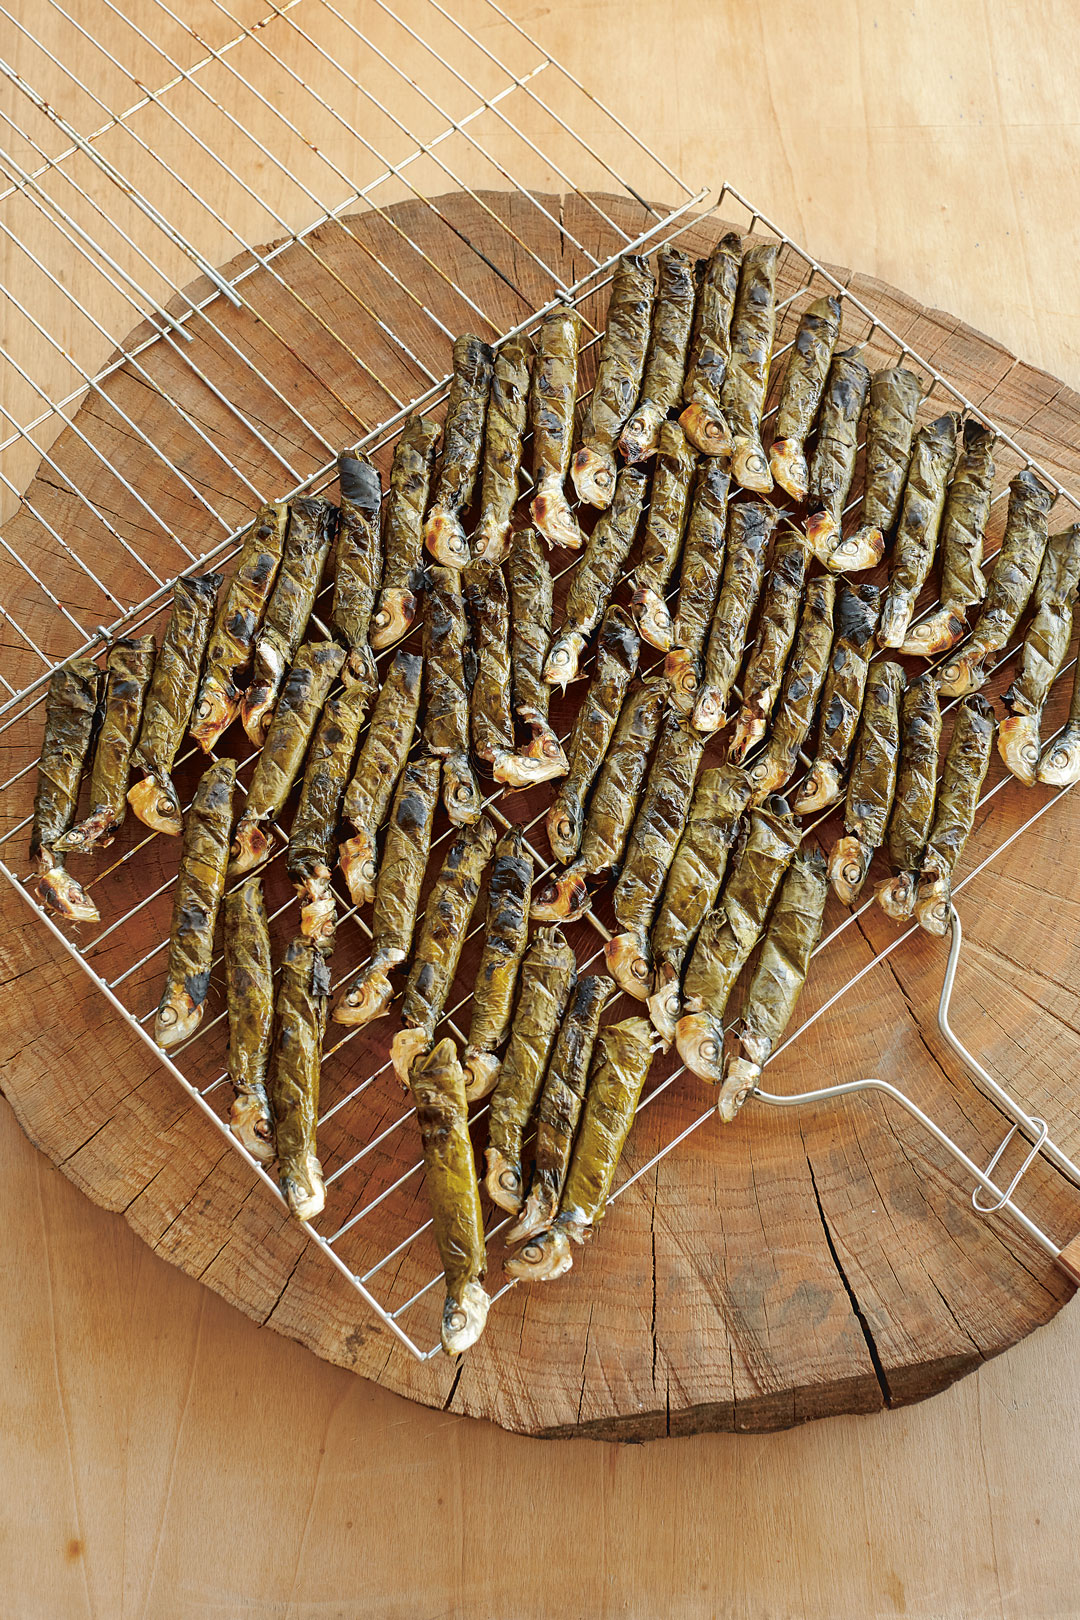 Sardines grilled in vine leaves, from The Turkish Cookbook